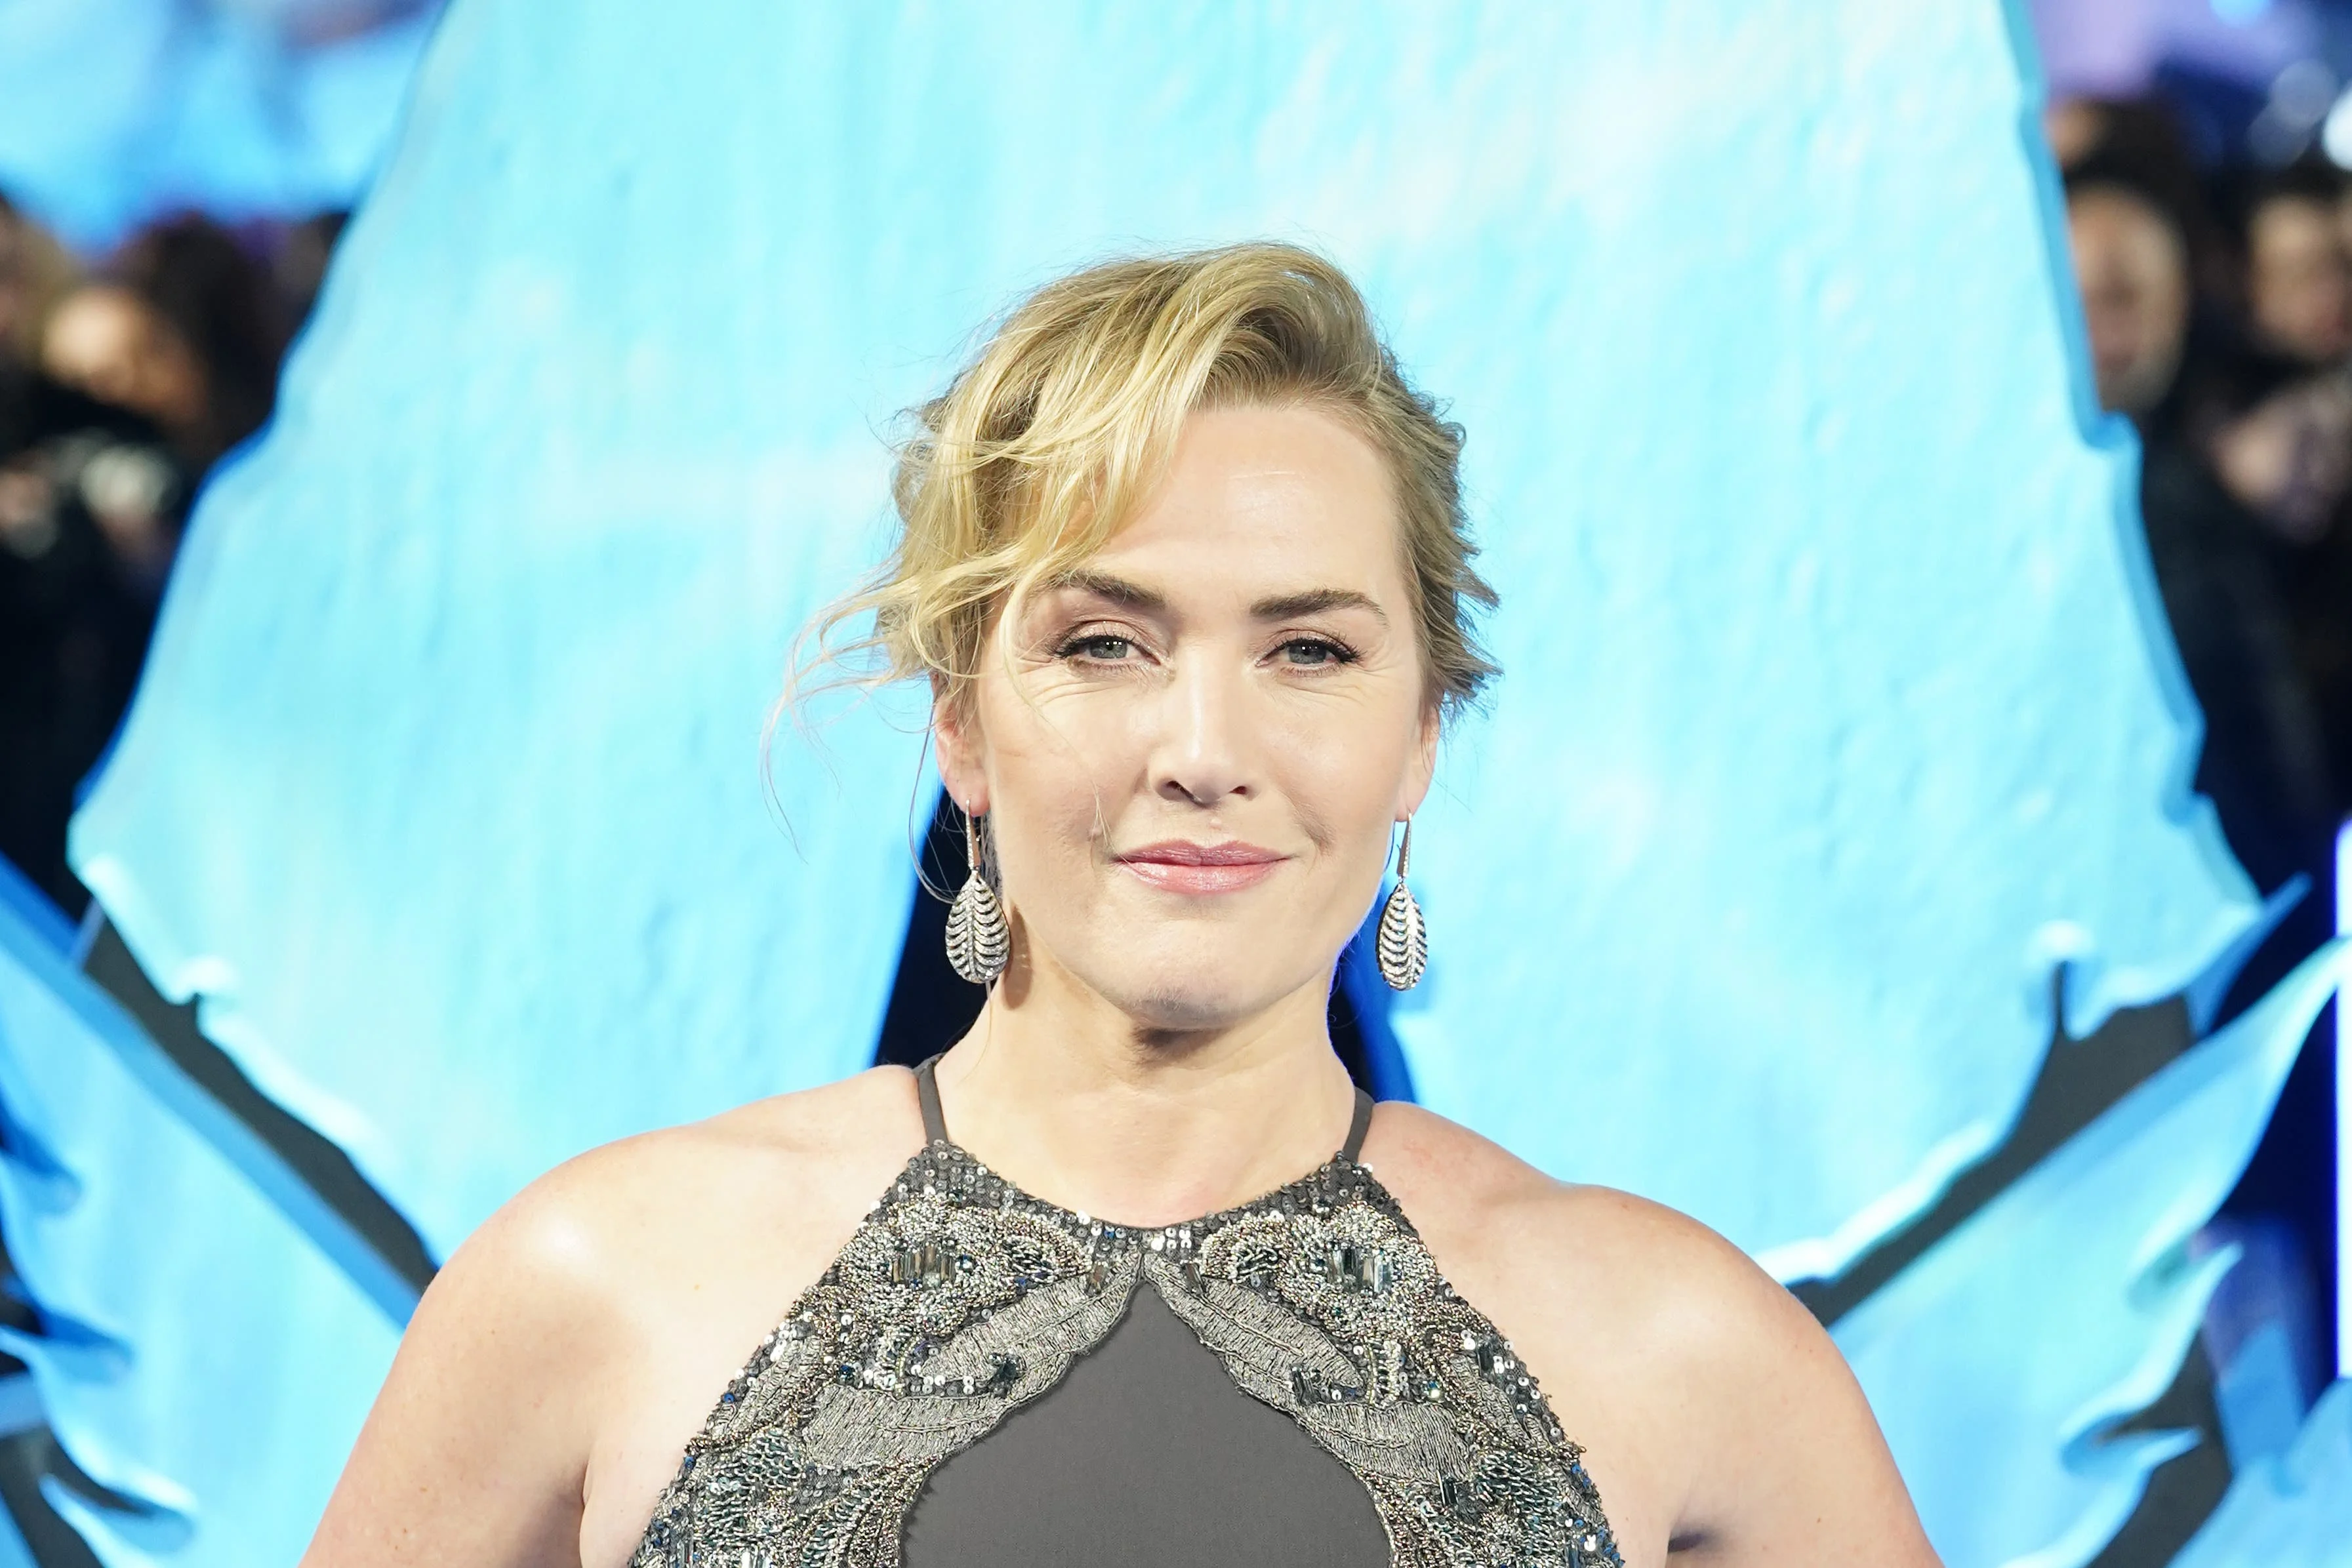 Kate Winslet breaks Tom Cruise's record of holding breath under water